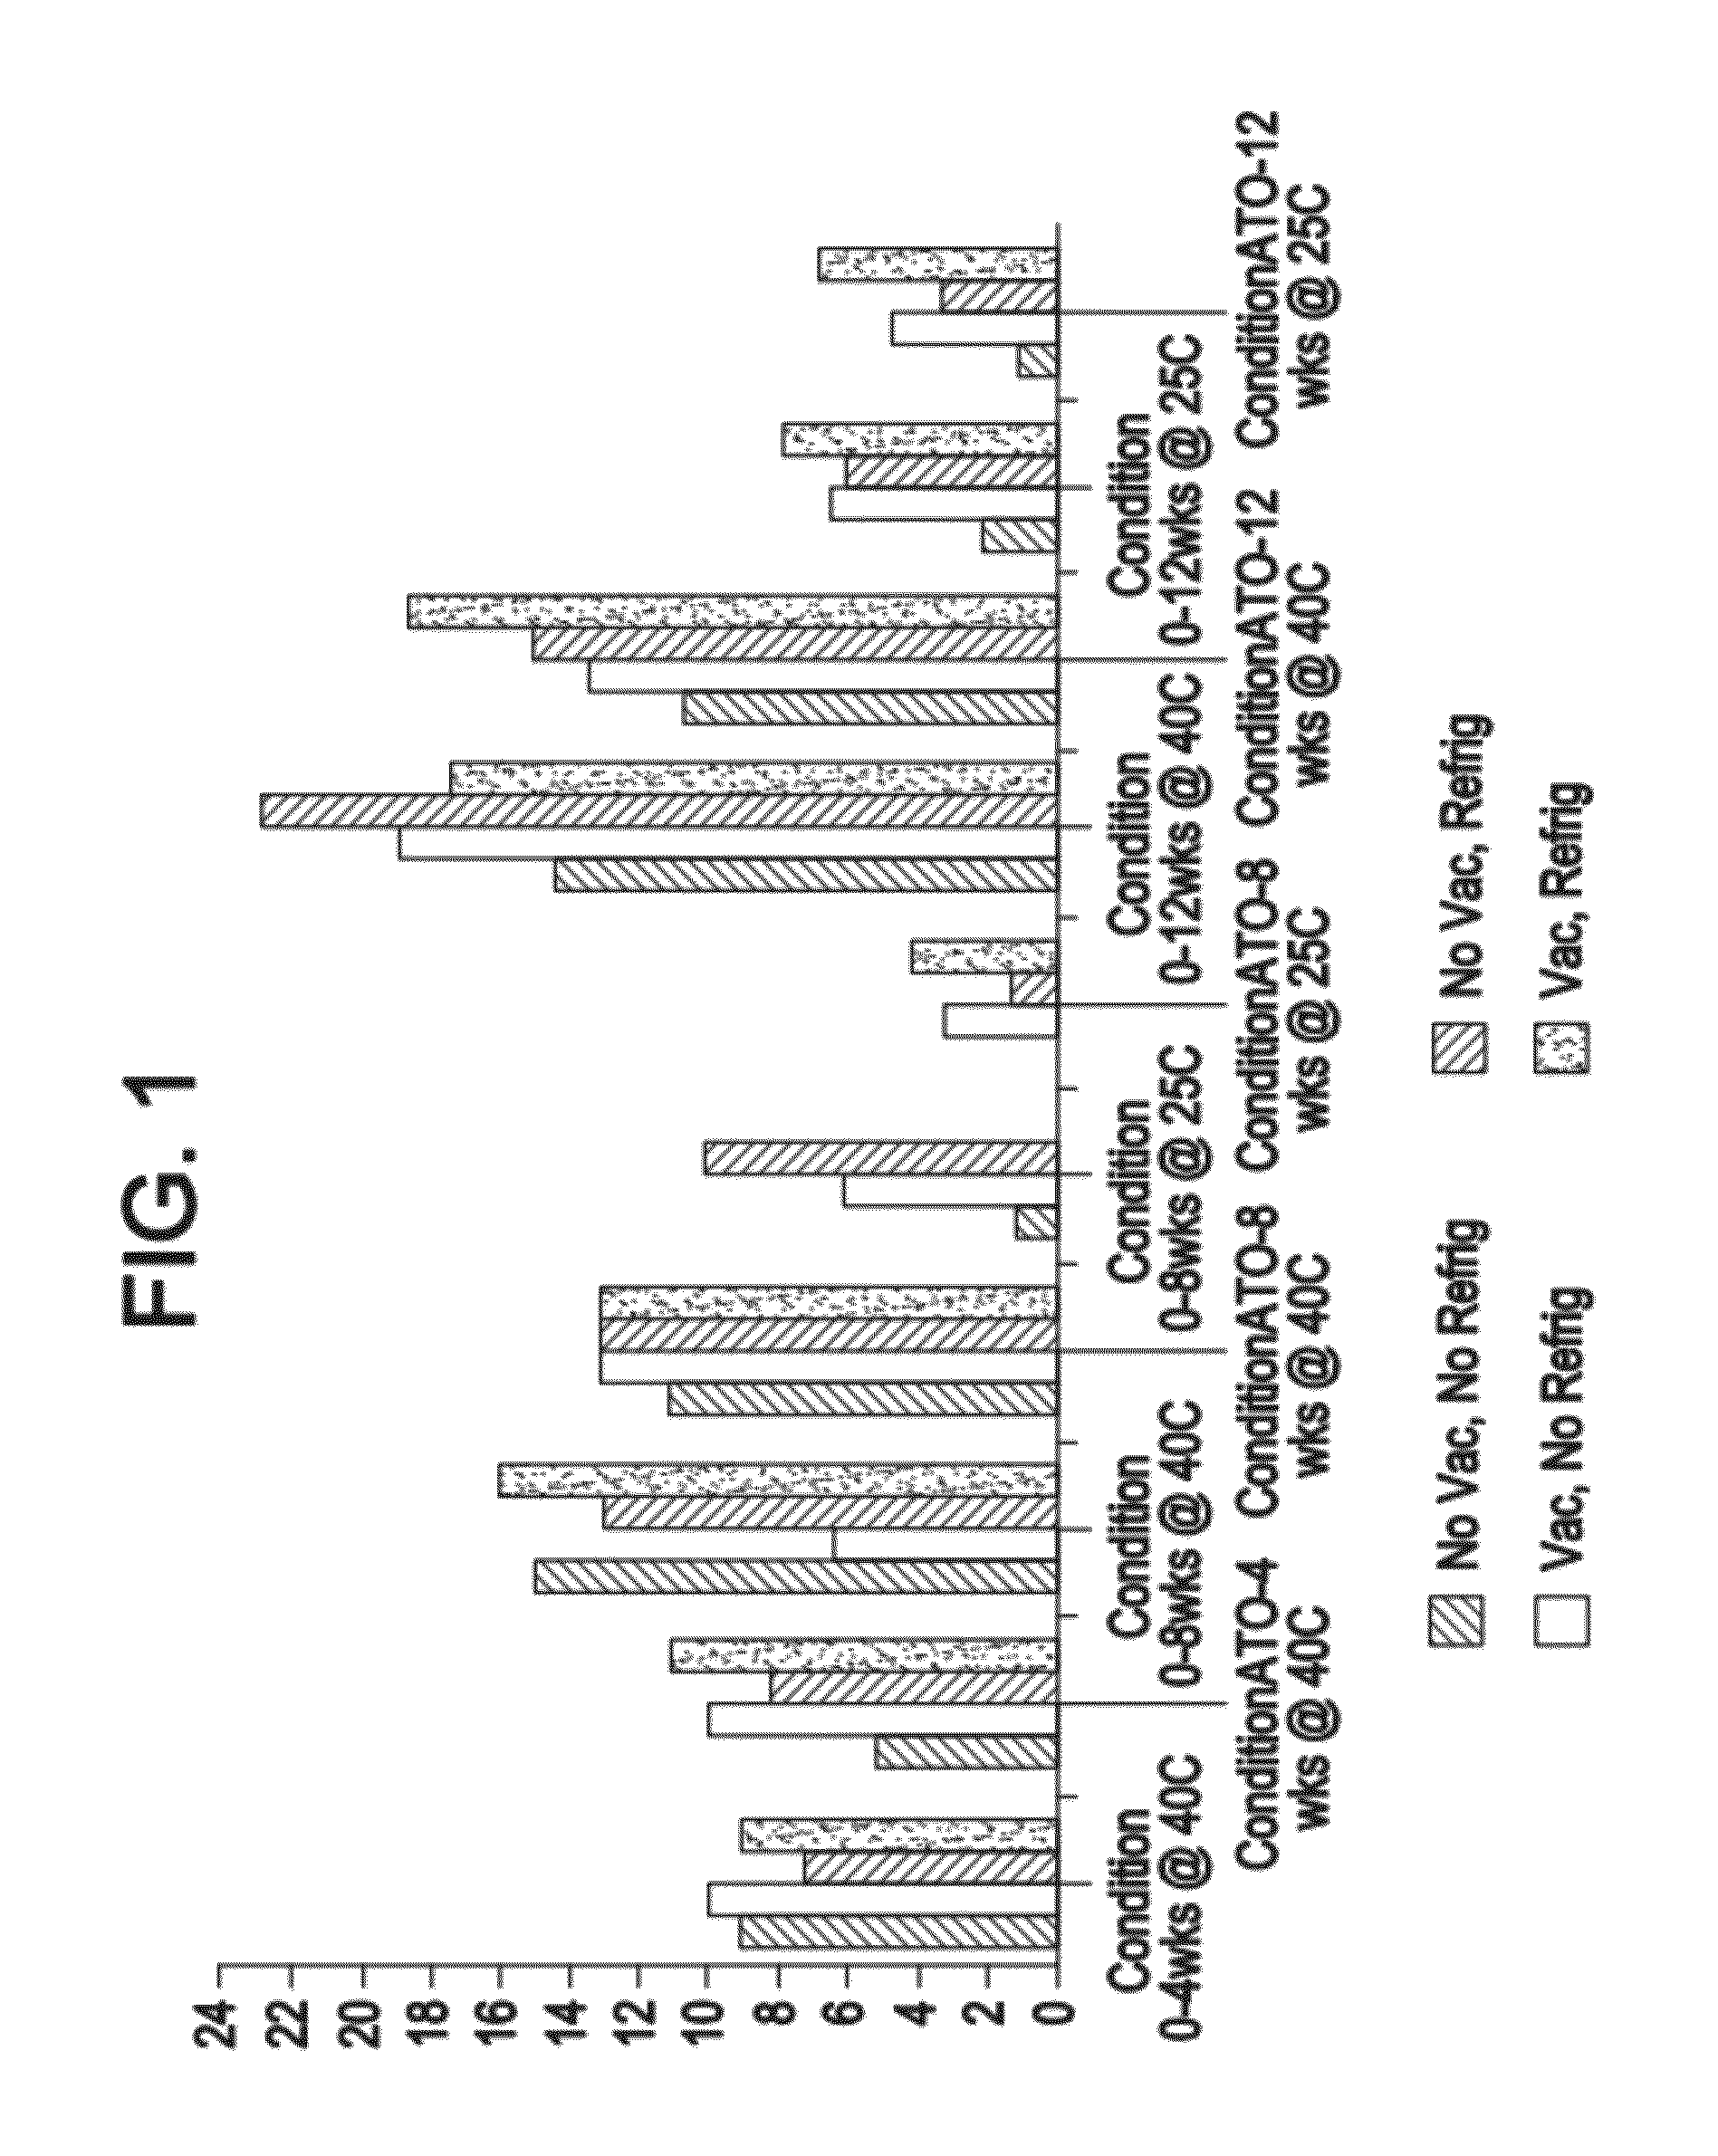 Expandable devices coated with a paclitaxel composition